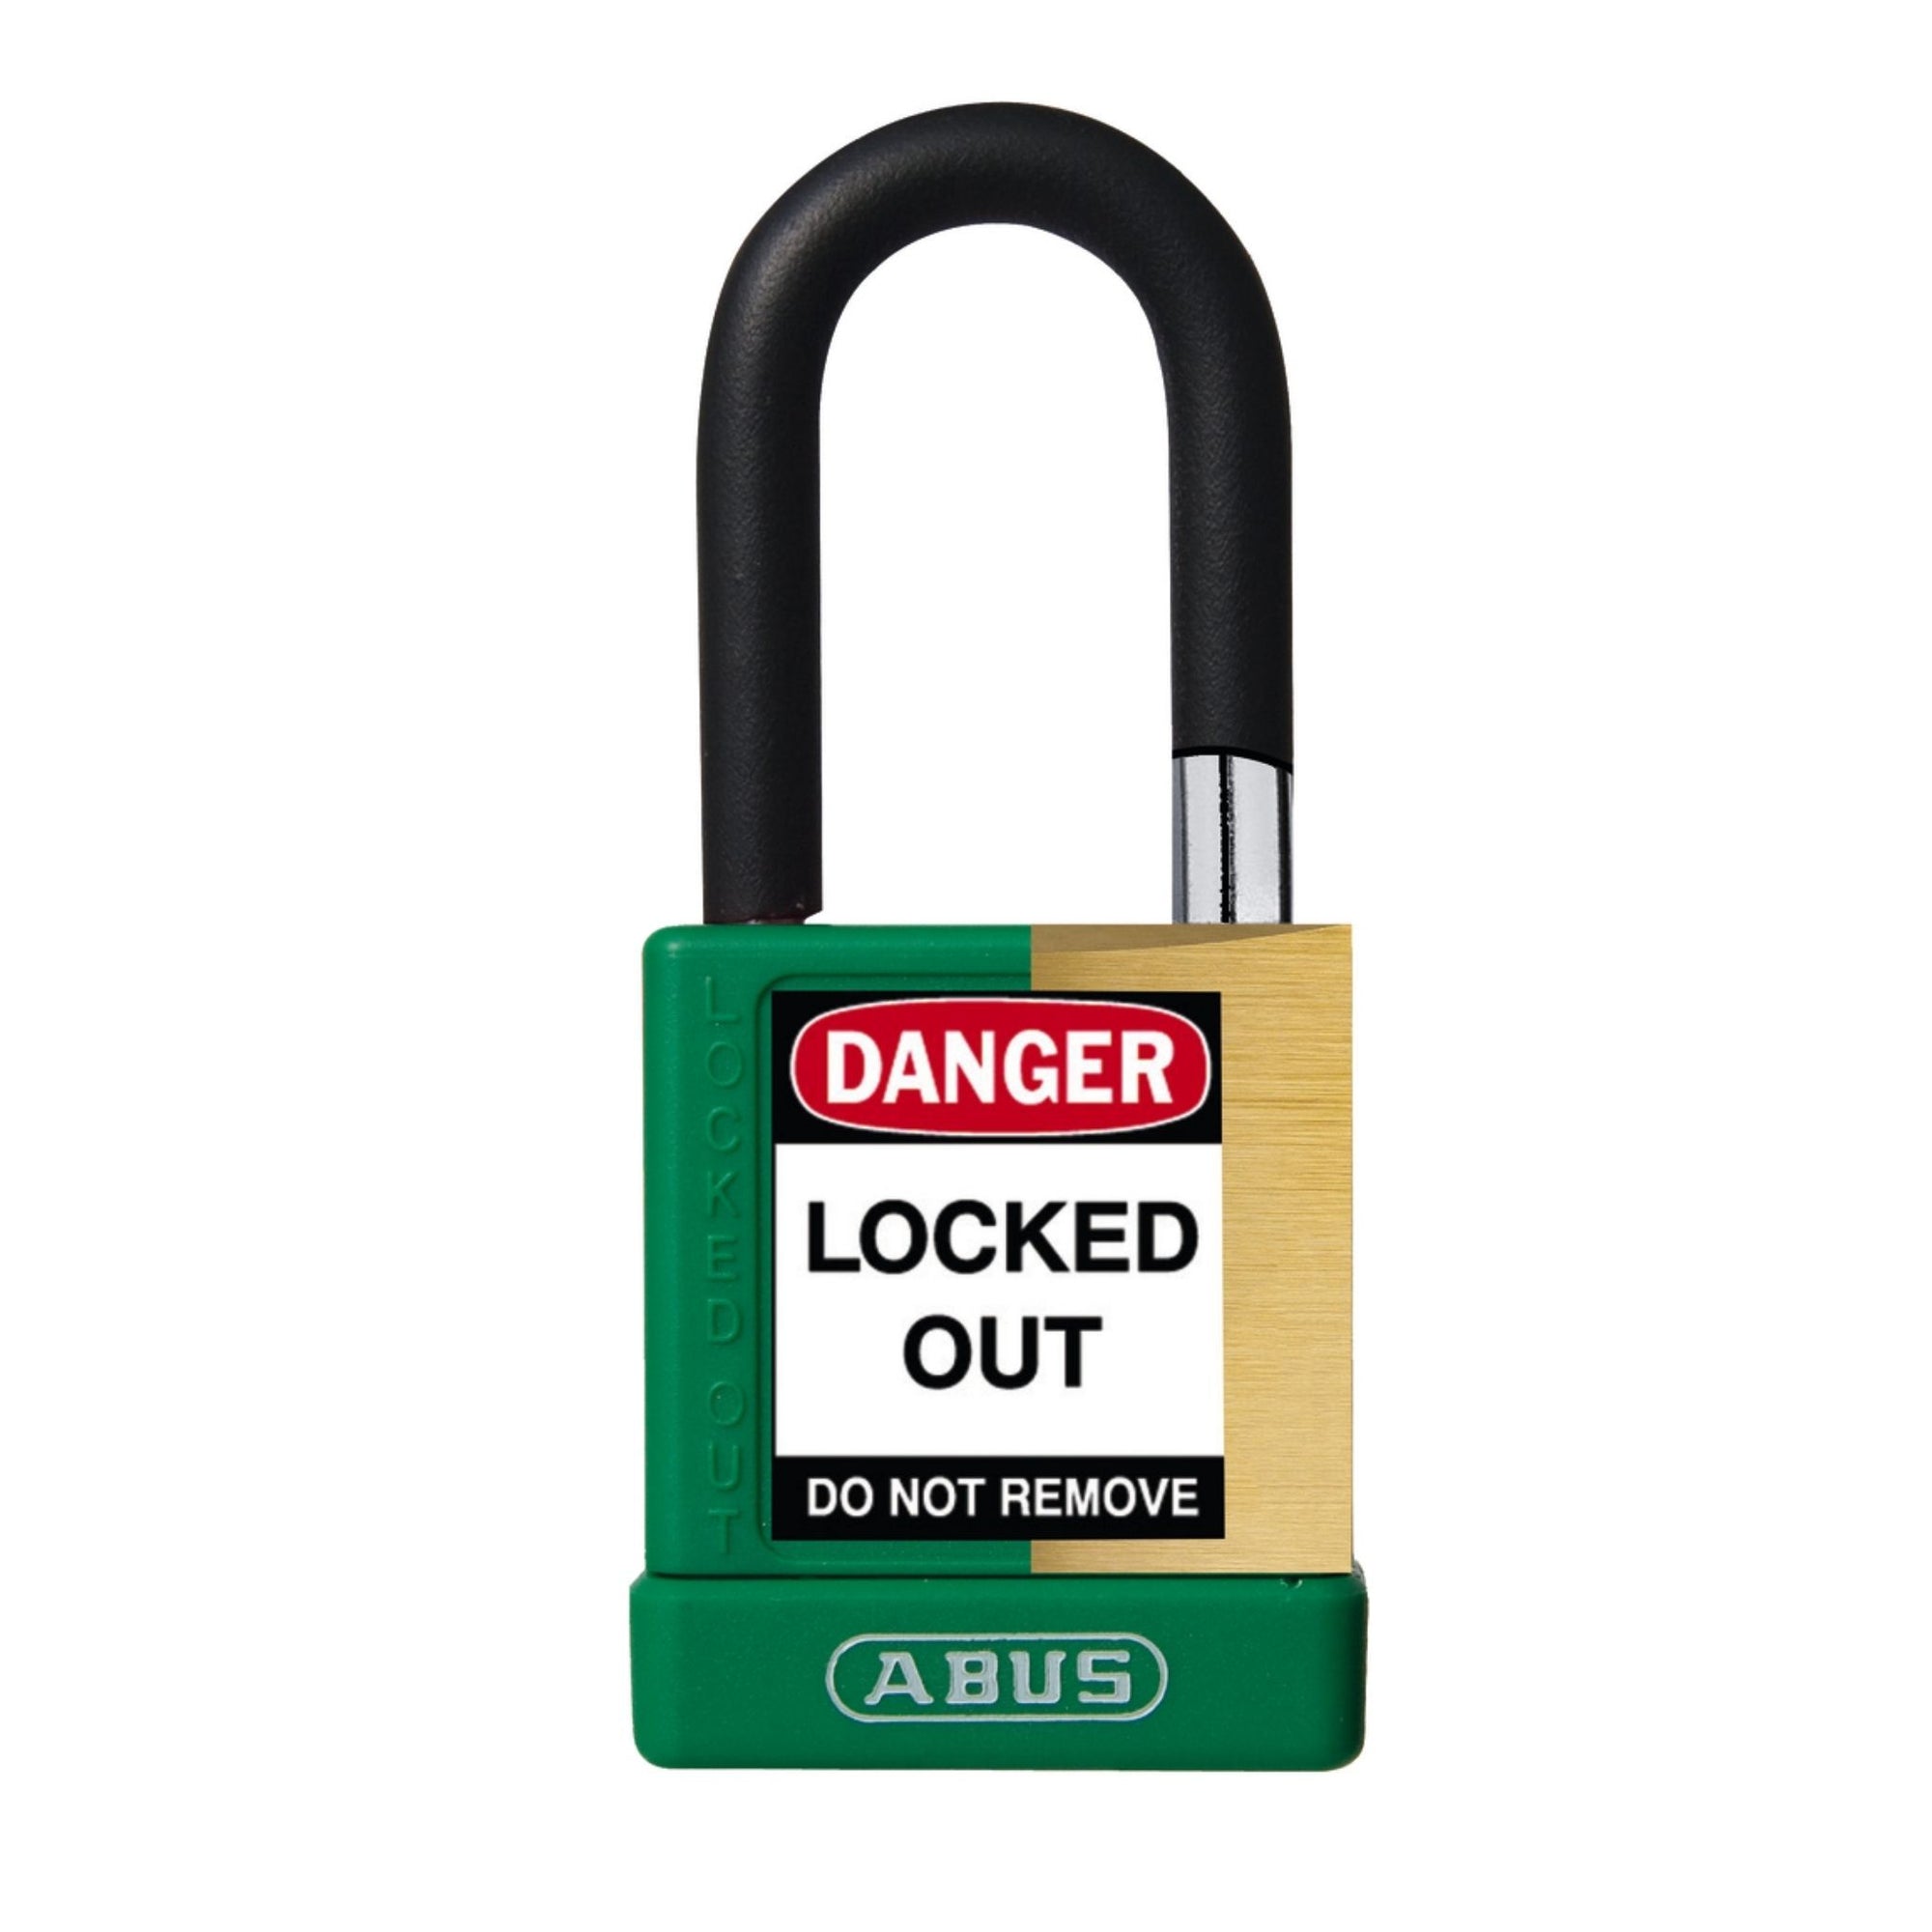 Abus 74M/40 KD Green Insulated Brass Safety Padlock with 1-1/2" Shackle - The Lock Source